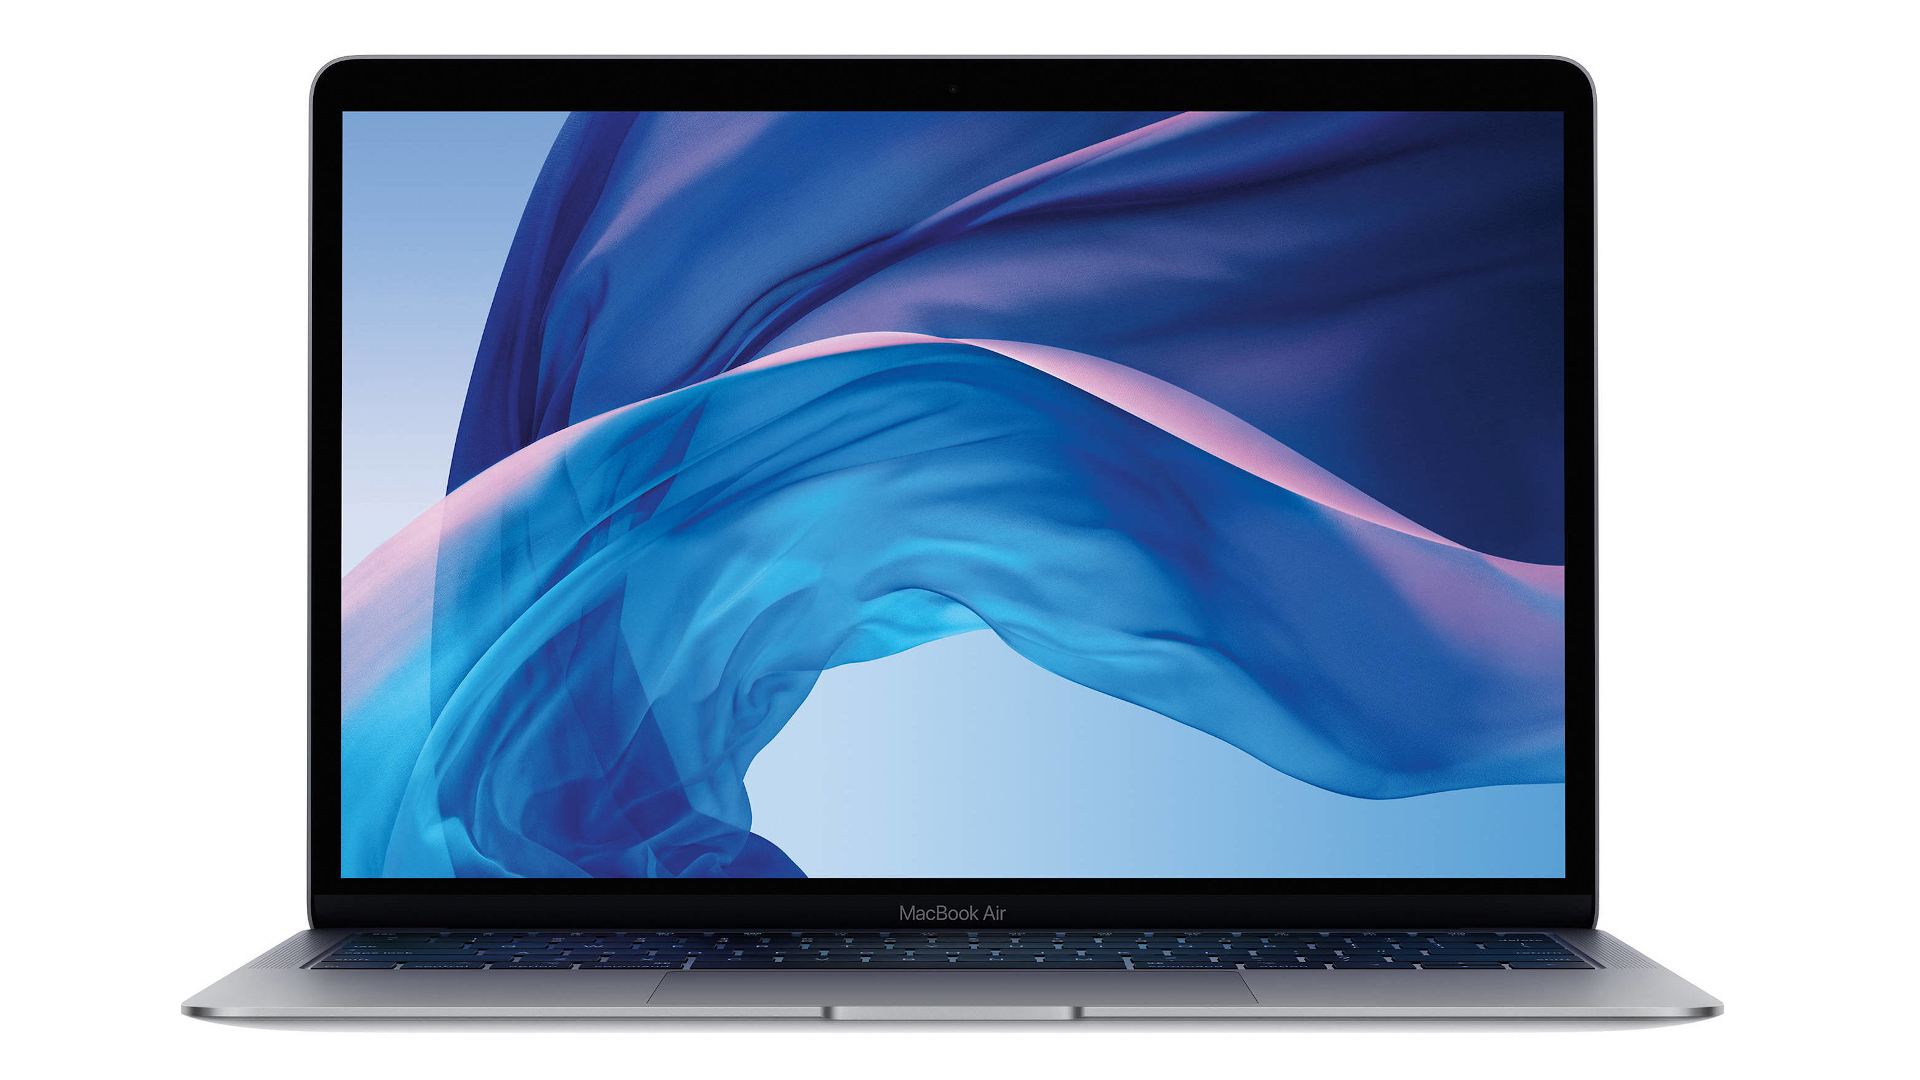 Apple MacBook Air - a thin and light laptop